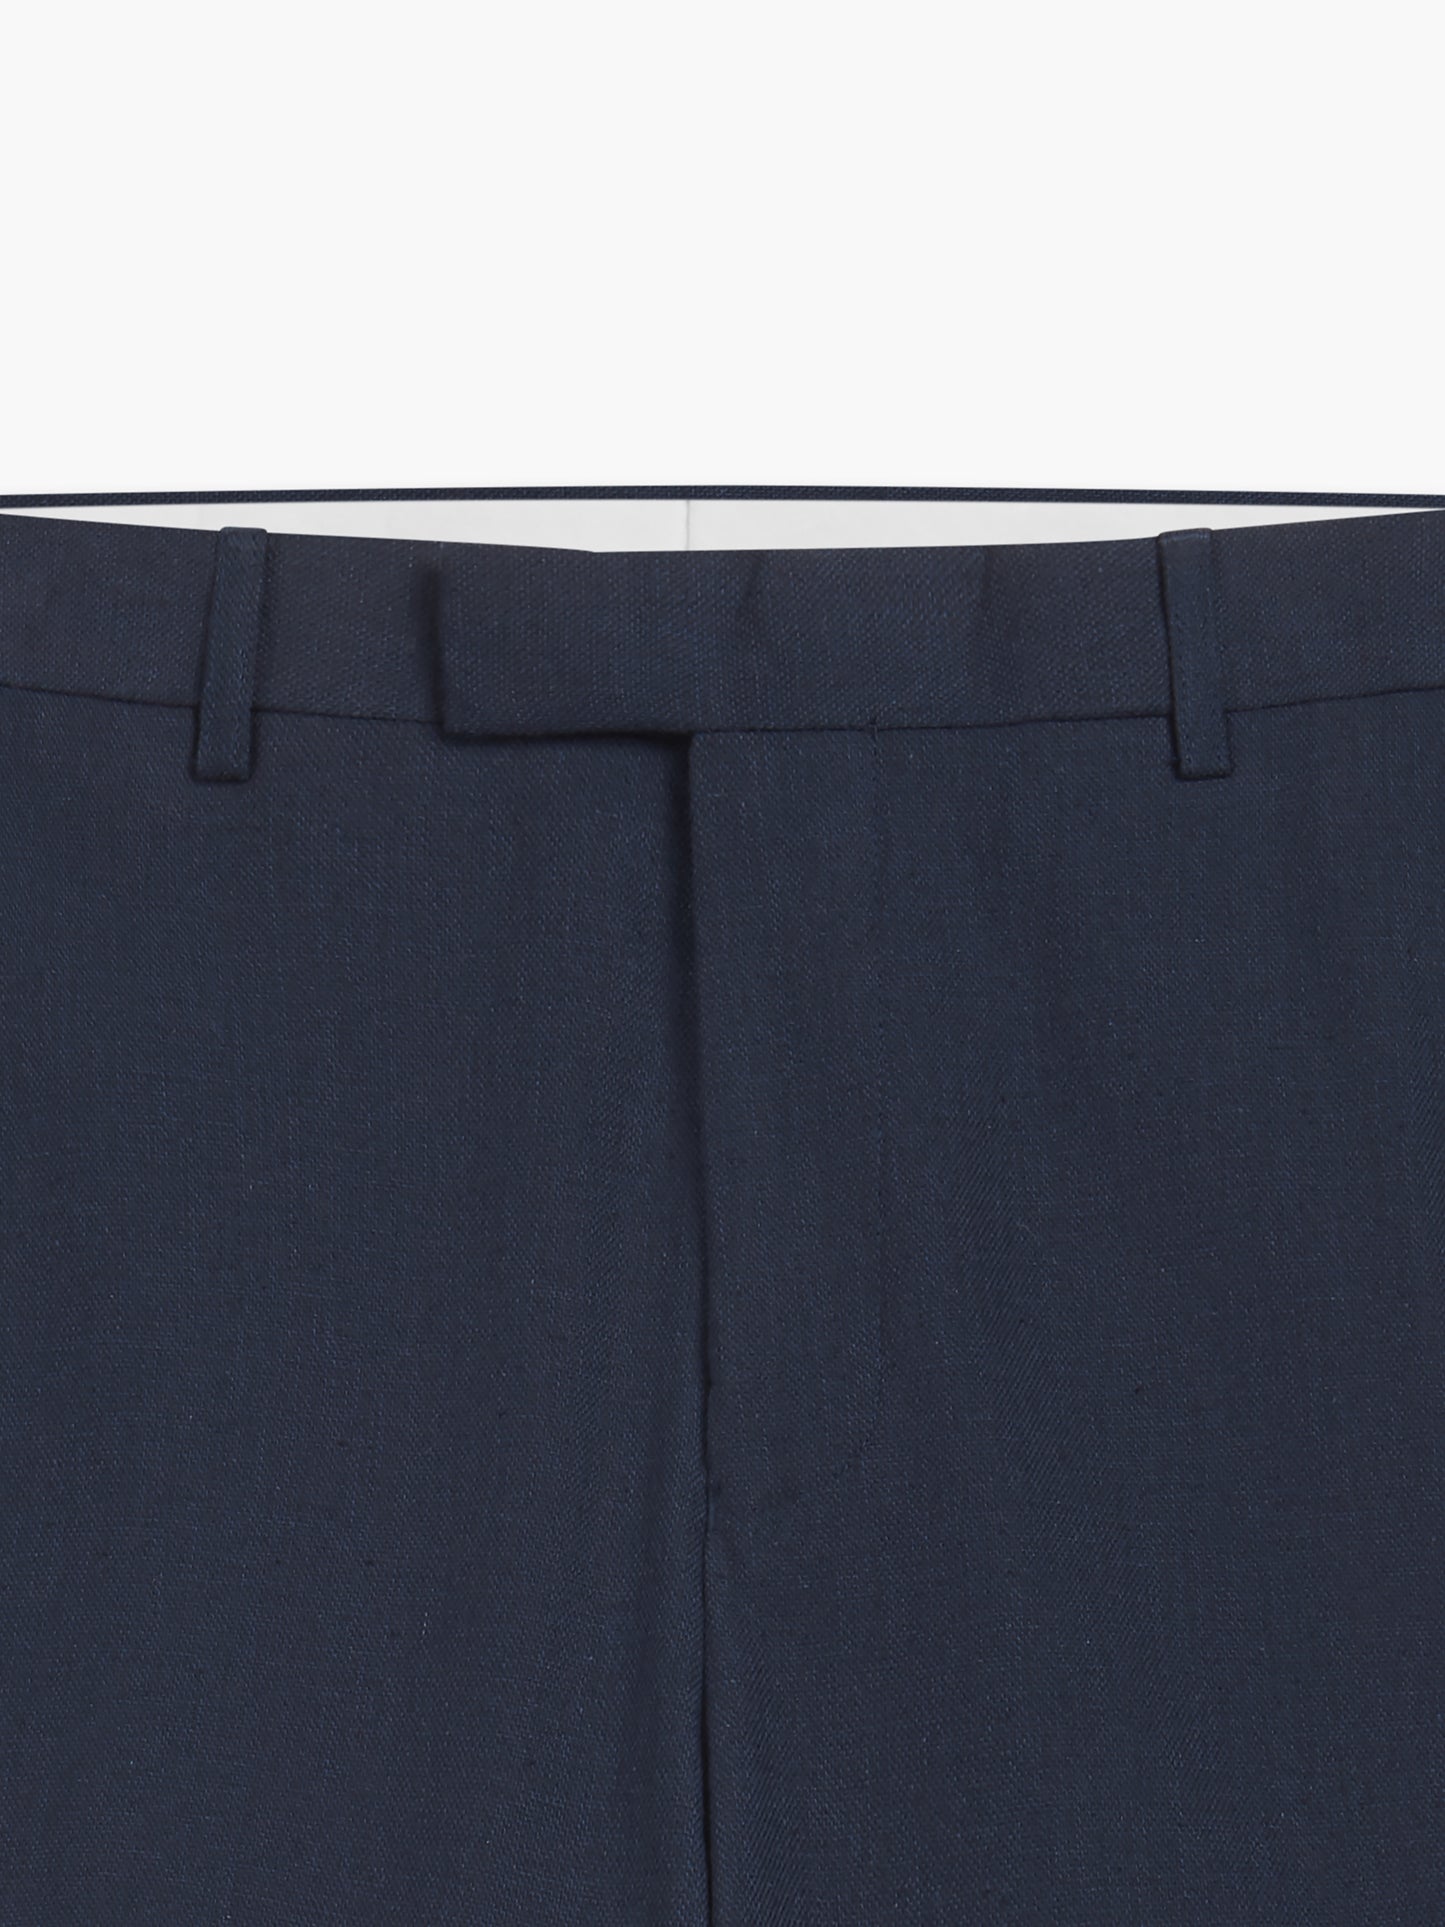 Image 8 of Slim Fit Linen Suit Trousers in Navy